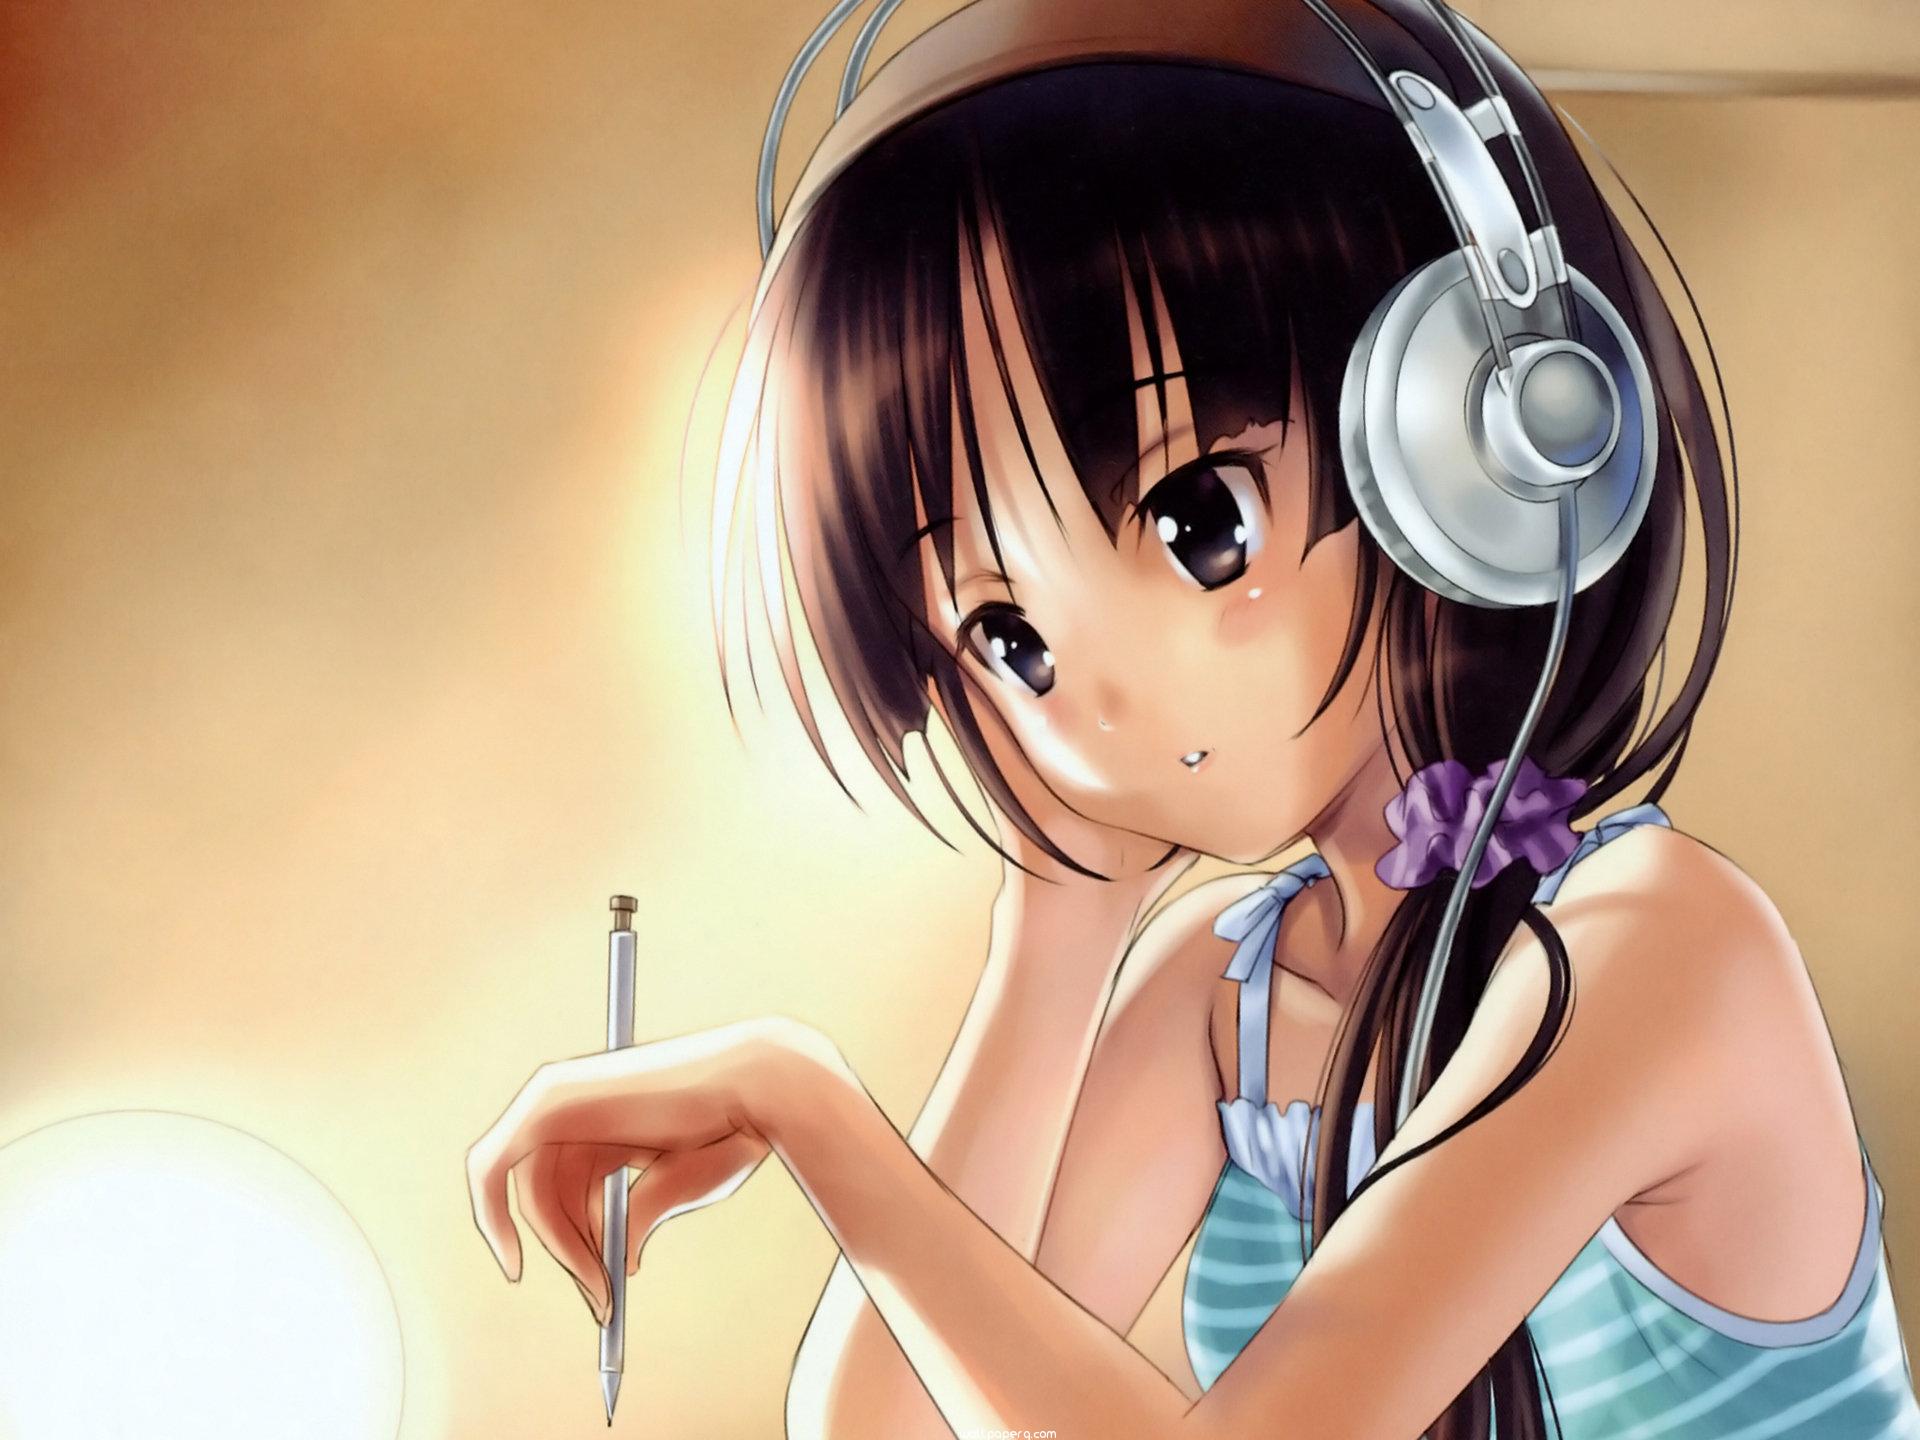 Download Anime girl listening music baby girl wallpaper for your mobile cell phone